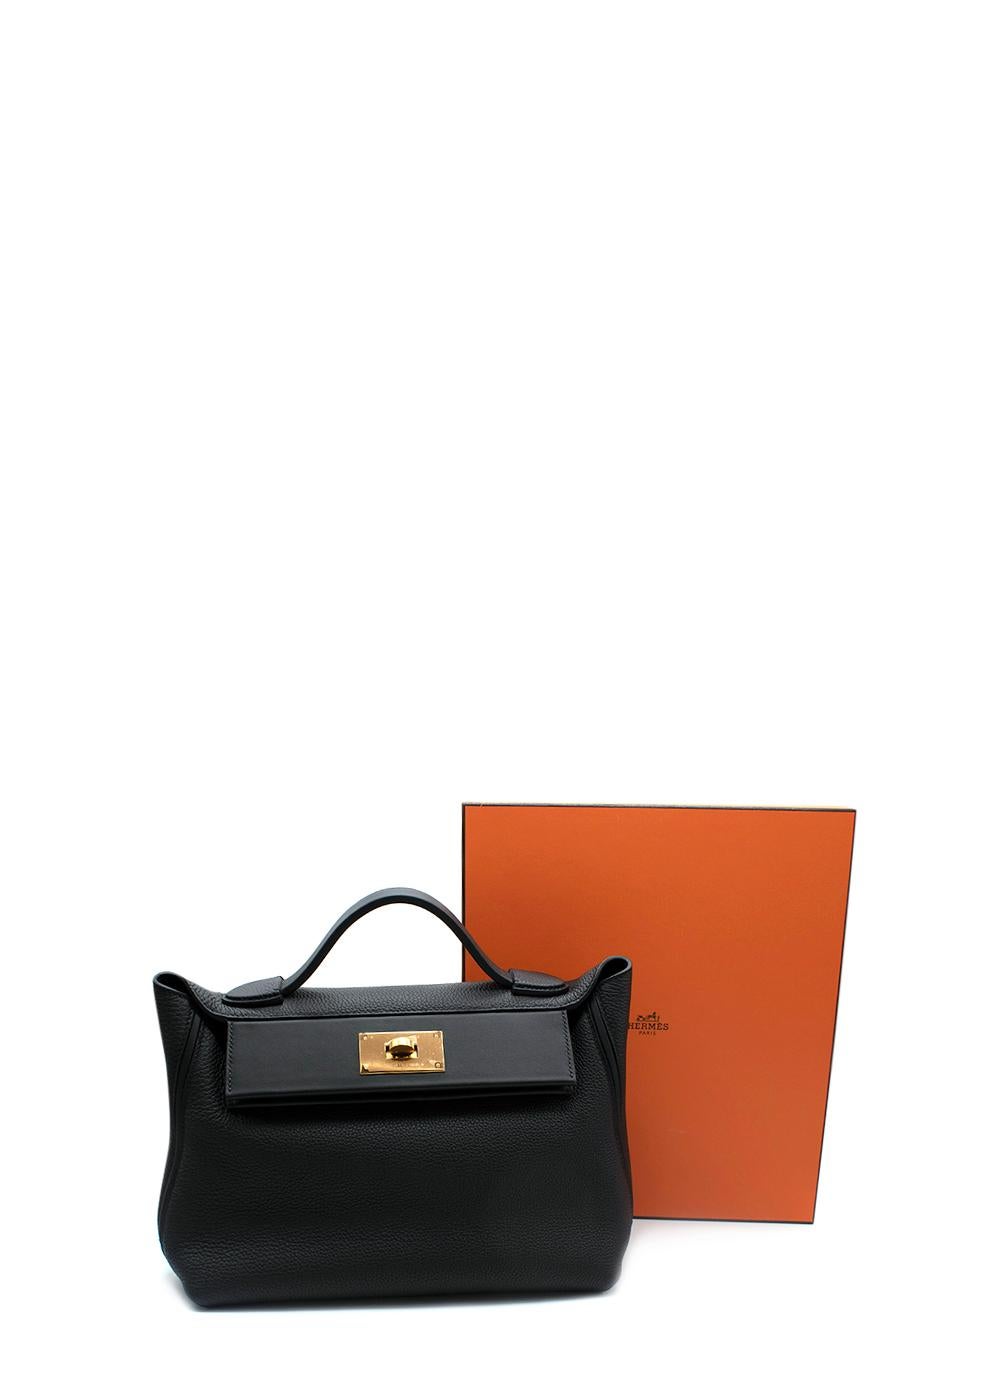 Hermes Black 29cm Swift/Clemence 2424 Bag GHW

- Slouchy, chic top handle style with structured swift leather flap and gold-plated lock
- Detachable strap allows crossbody and shoulder wear
- Includes all original packaging 

Materials
Clemence